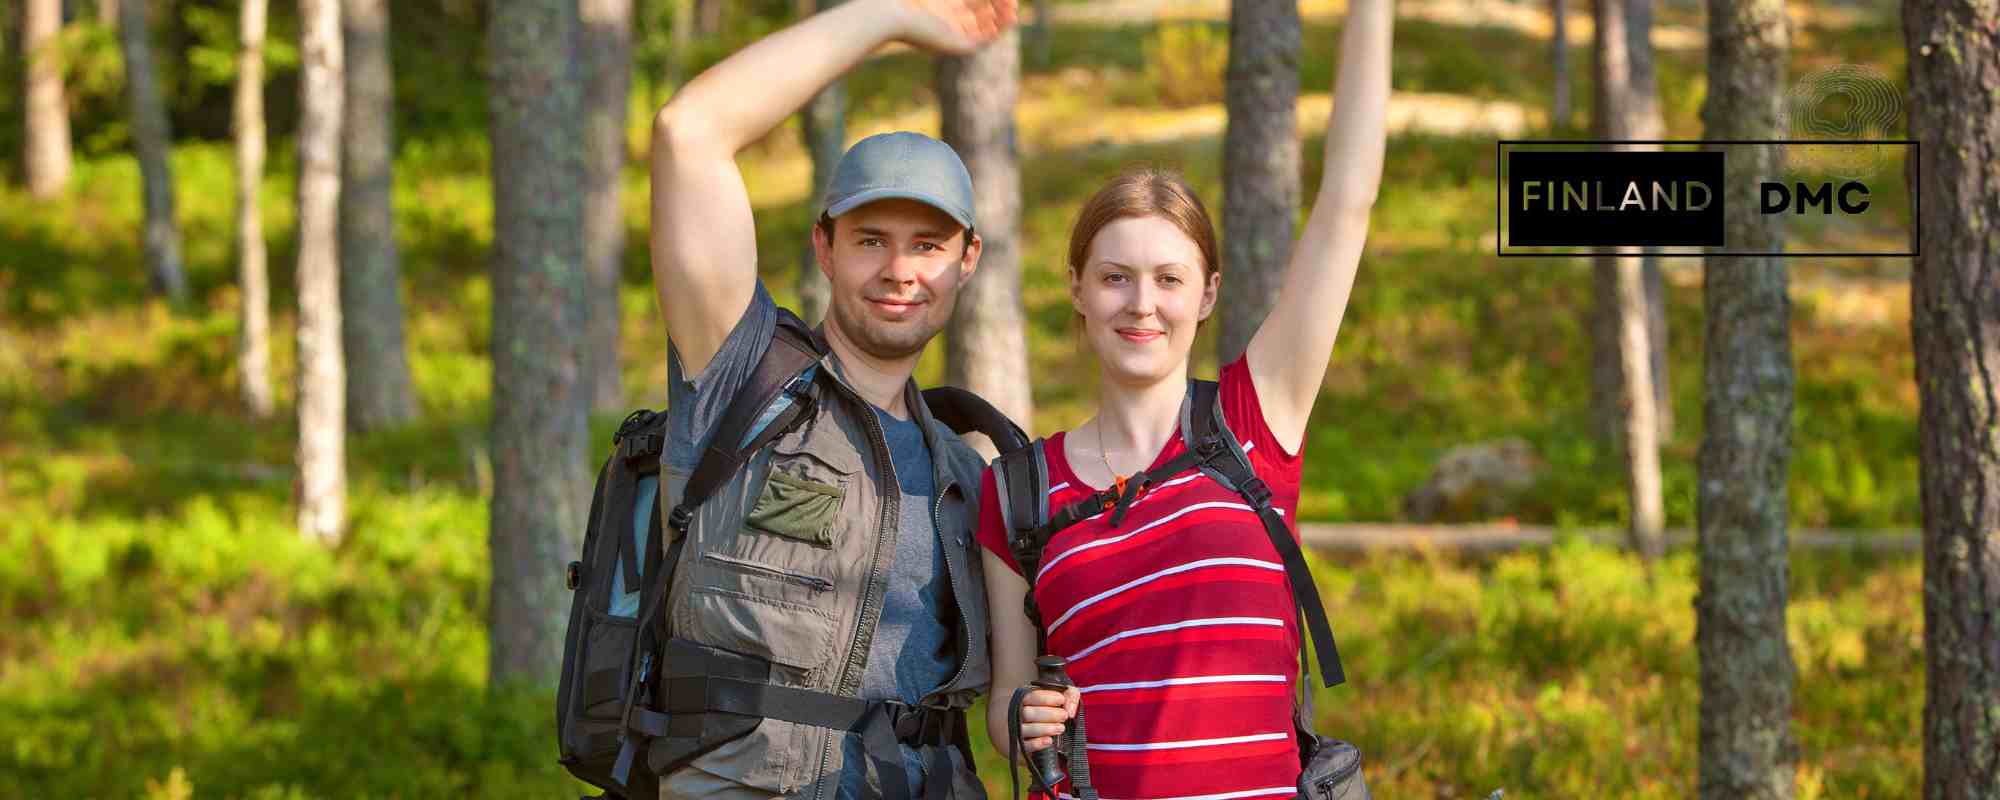 Best Finland tour package for Couple